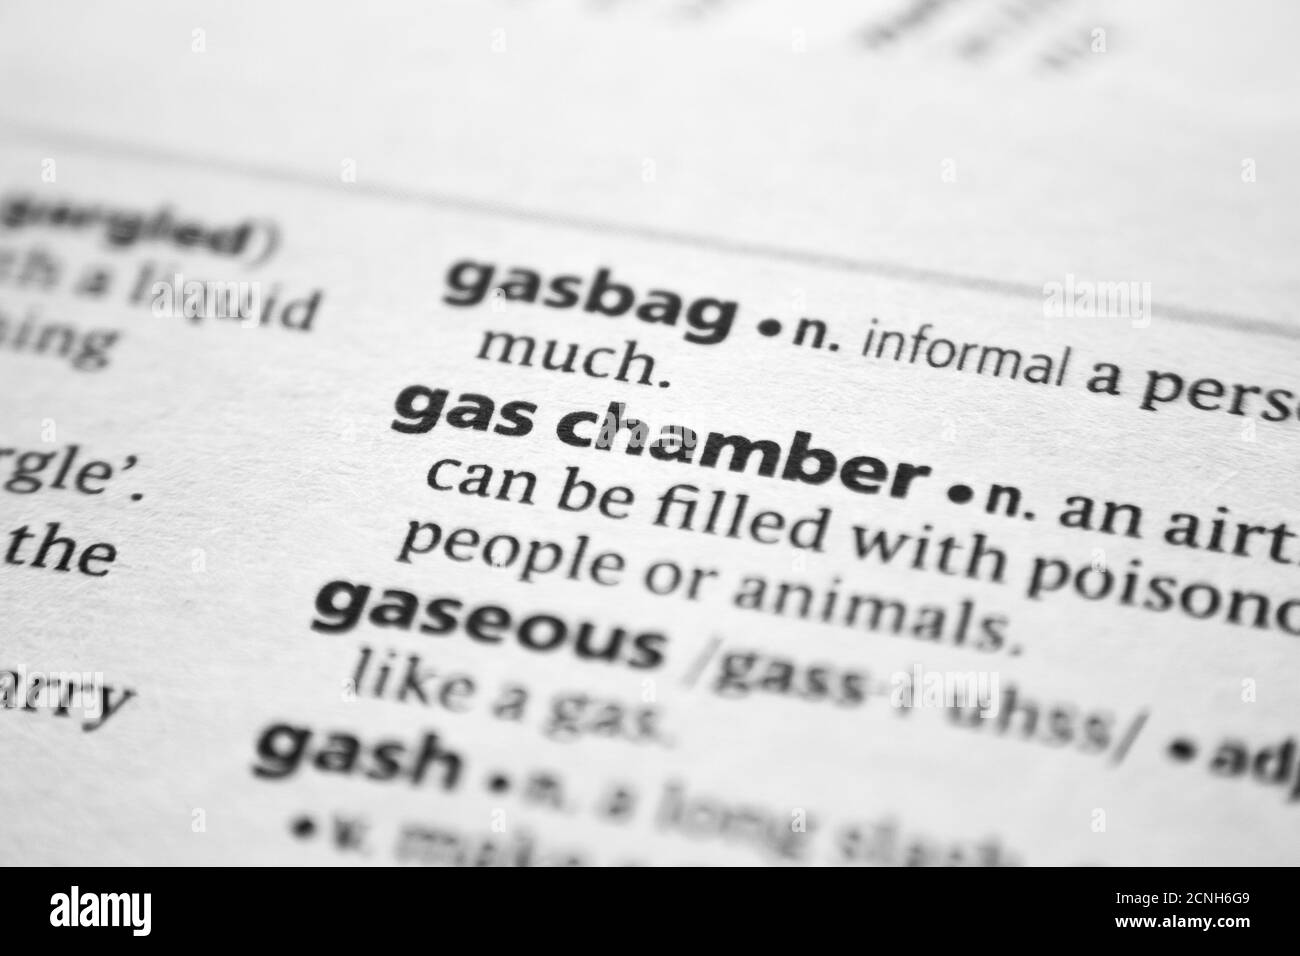 Word or phrase Gas chamber in a dictionary Stock Photo